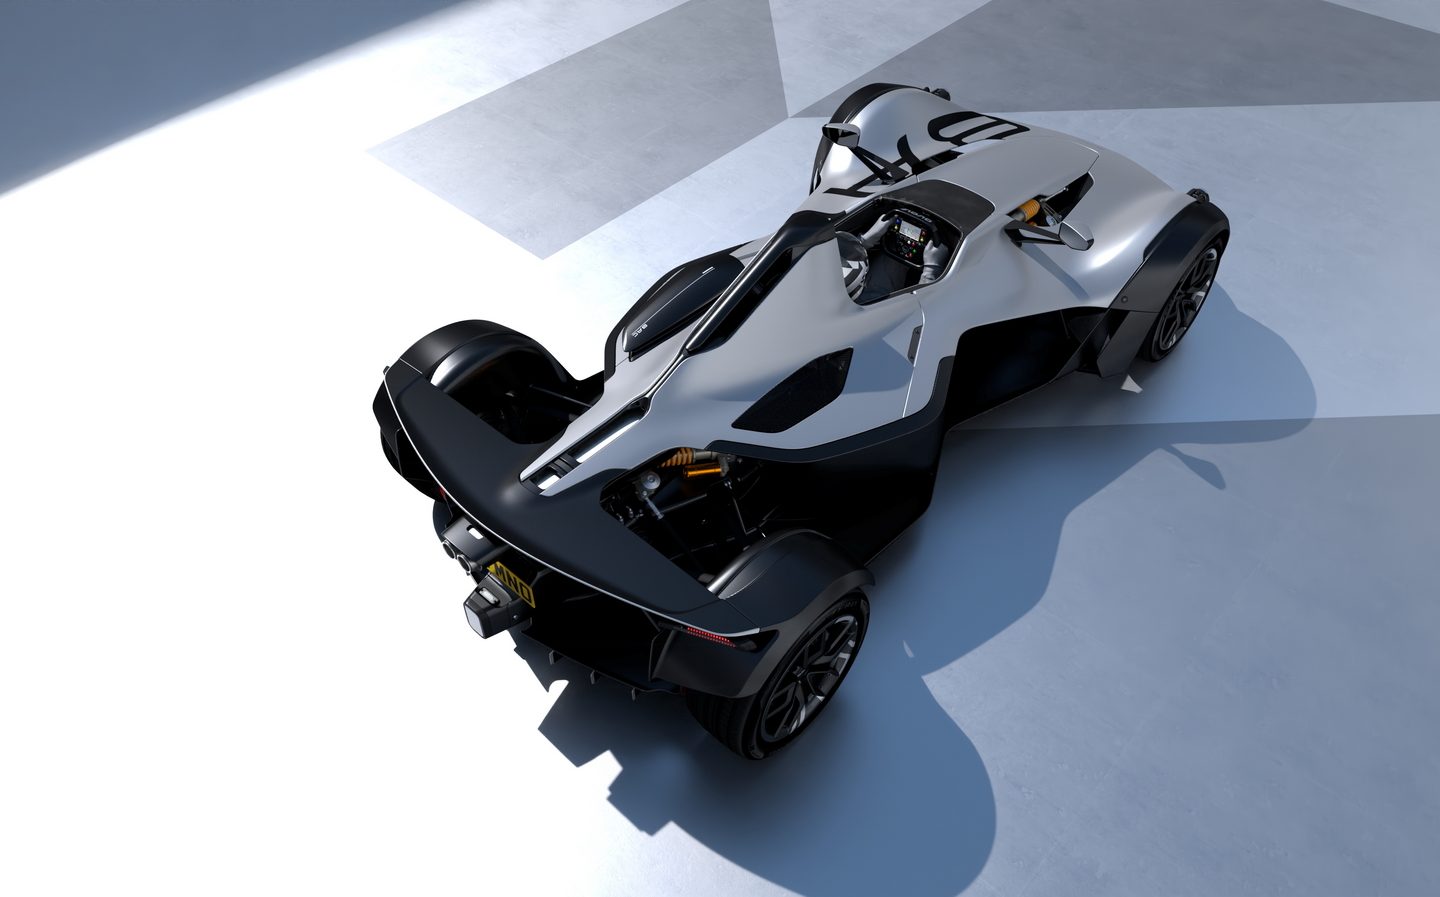 british sports cars, mono, monterey car week, sport, track day cars, new bac mono weighs just 570kg, hits 60mph in 2.7sec